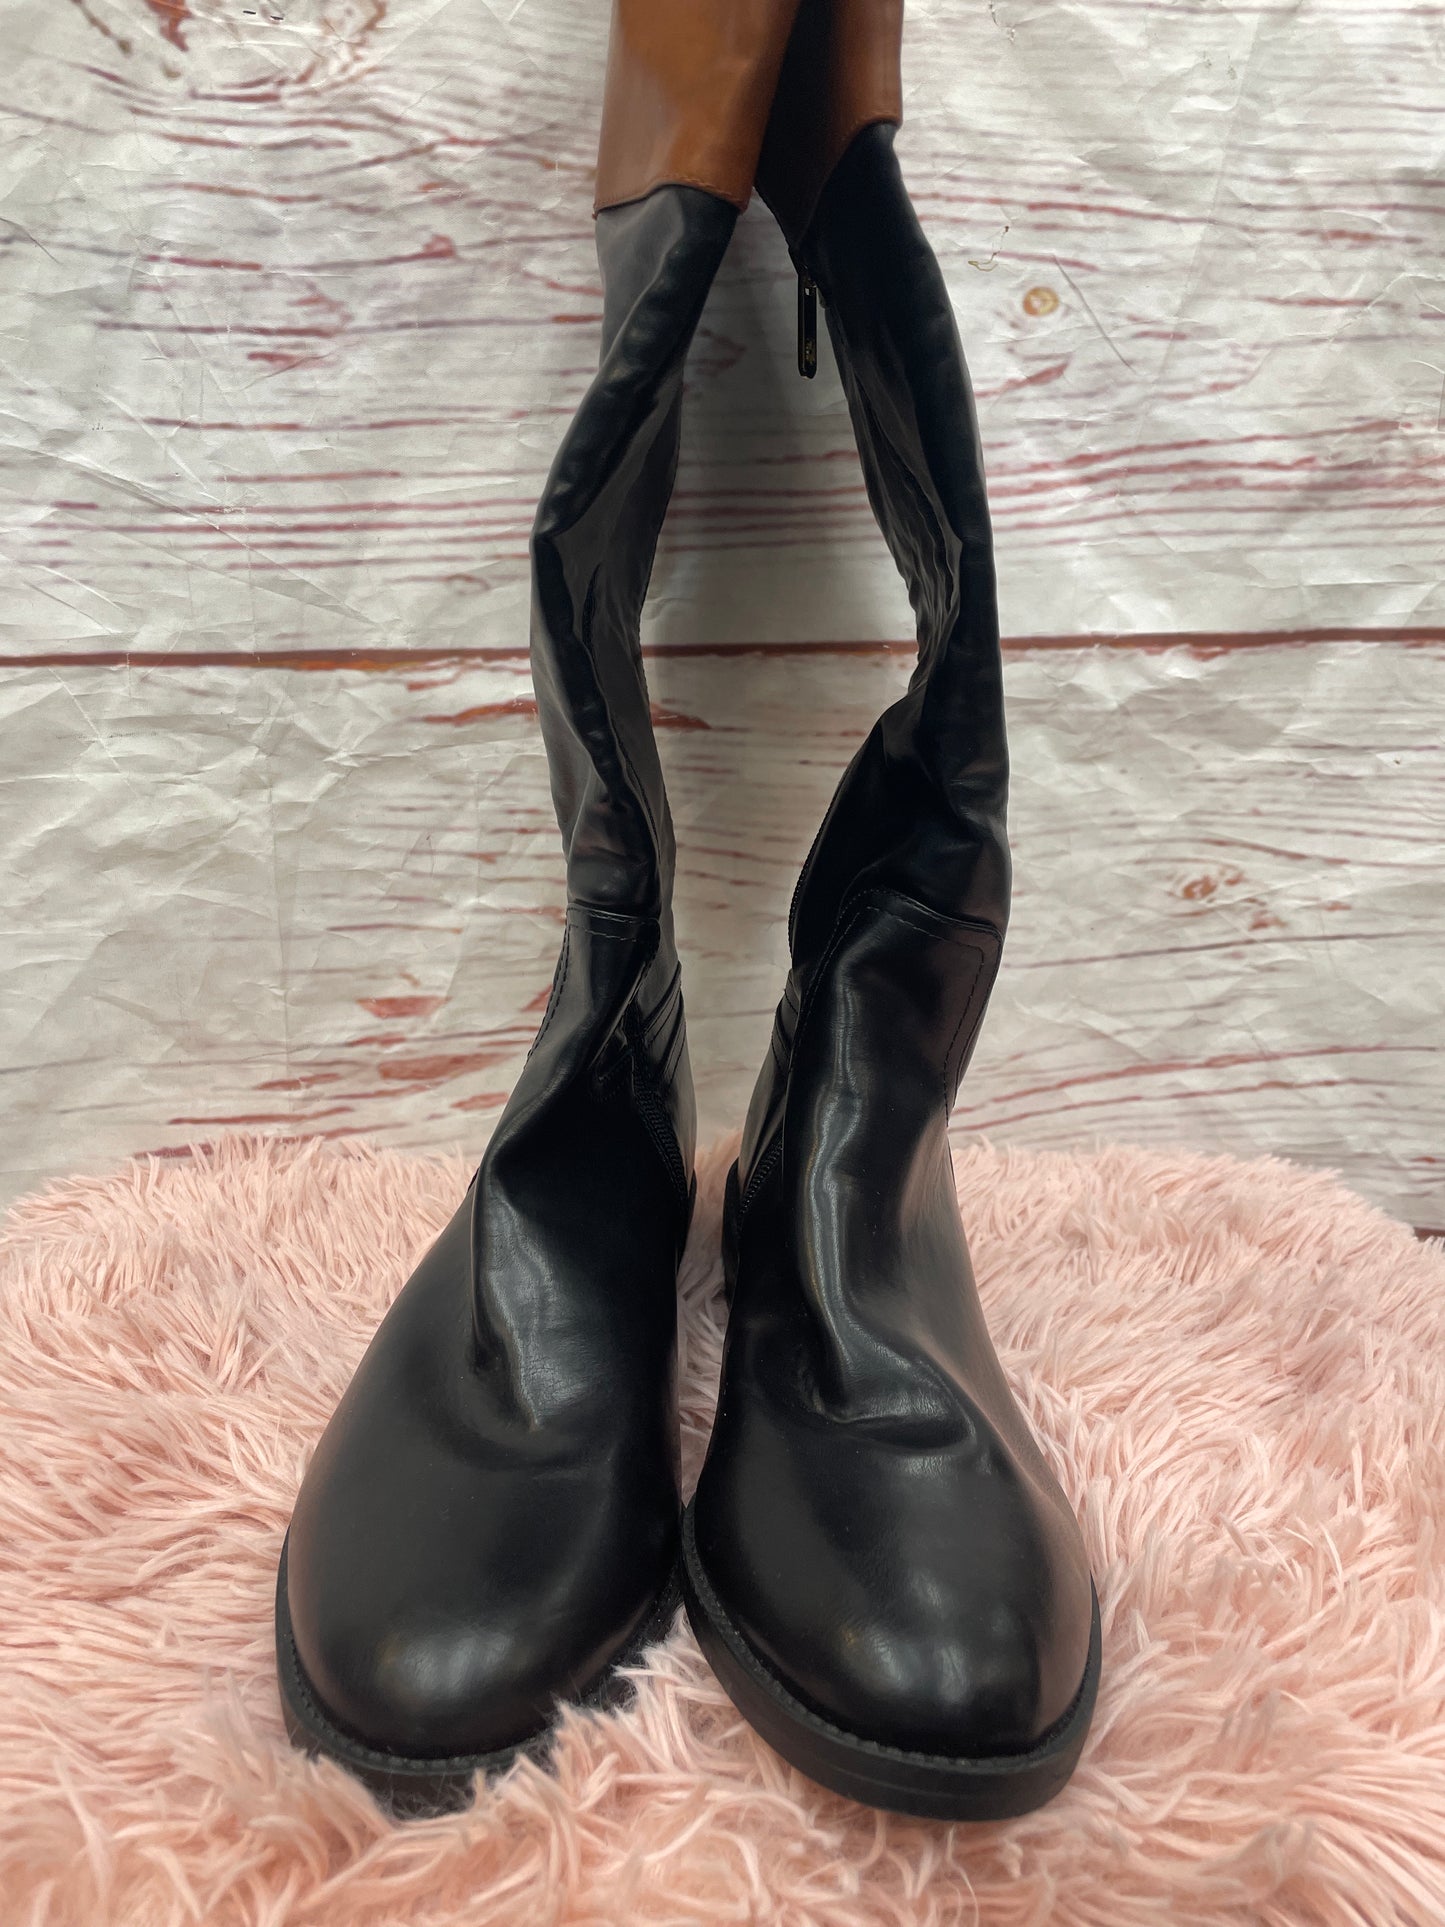 Boots Knee Flats By Tommy Hilfiger  Size: 11